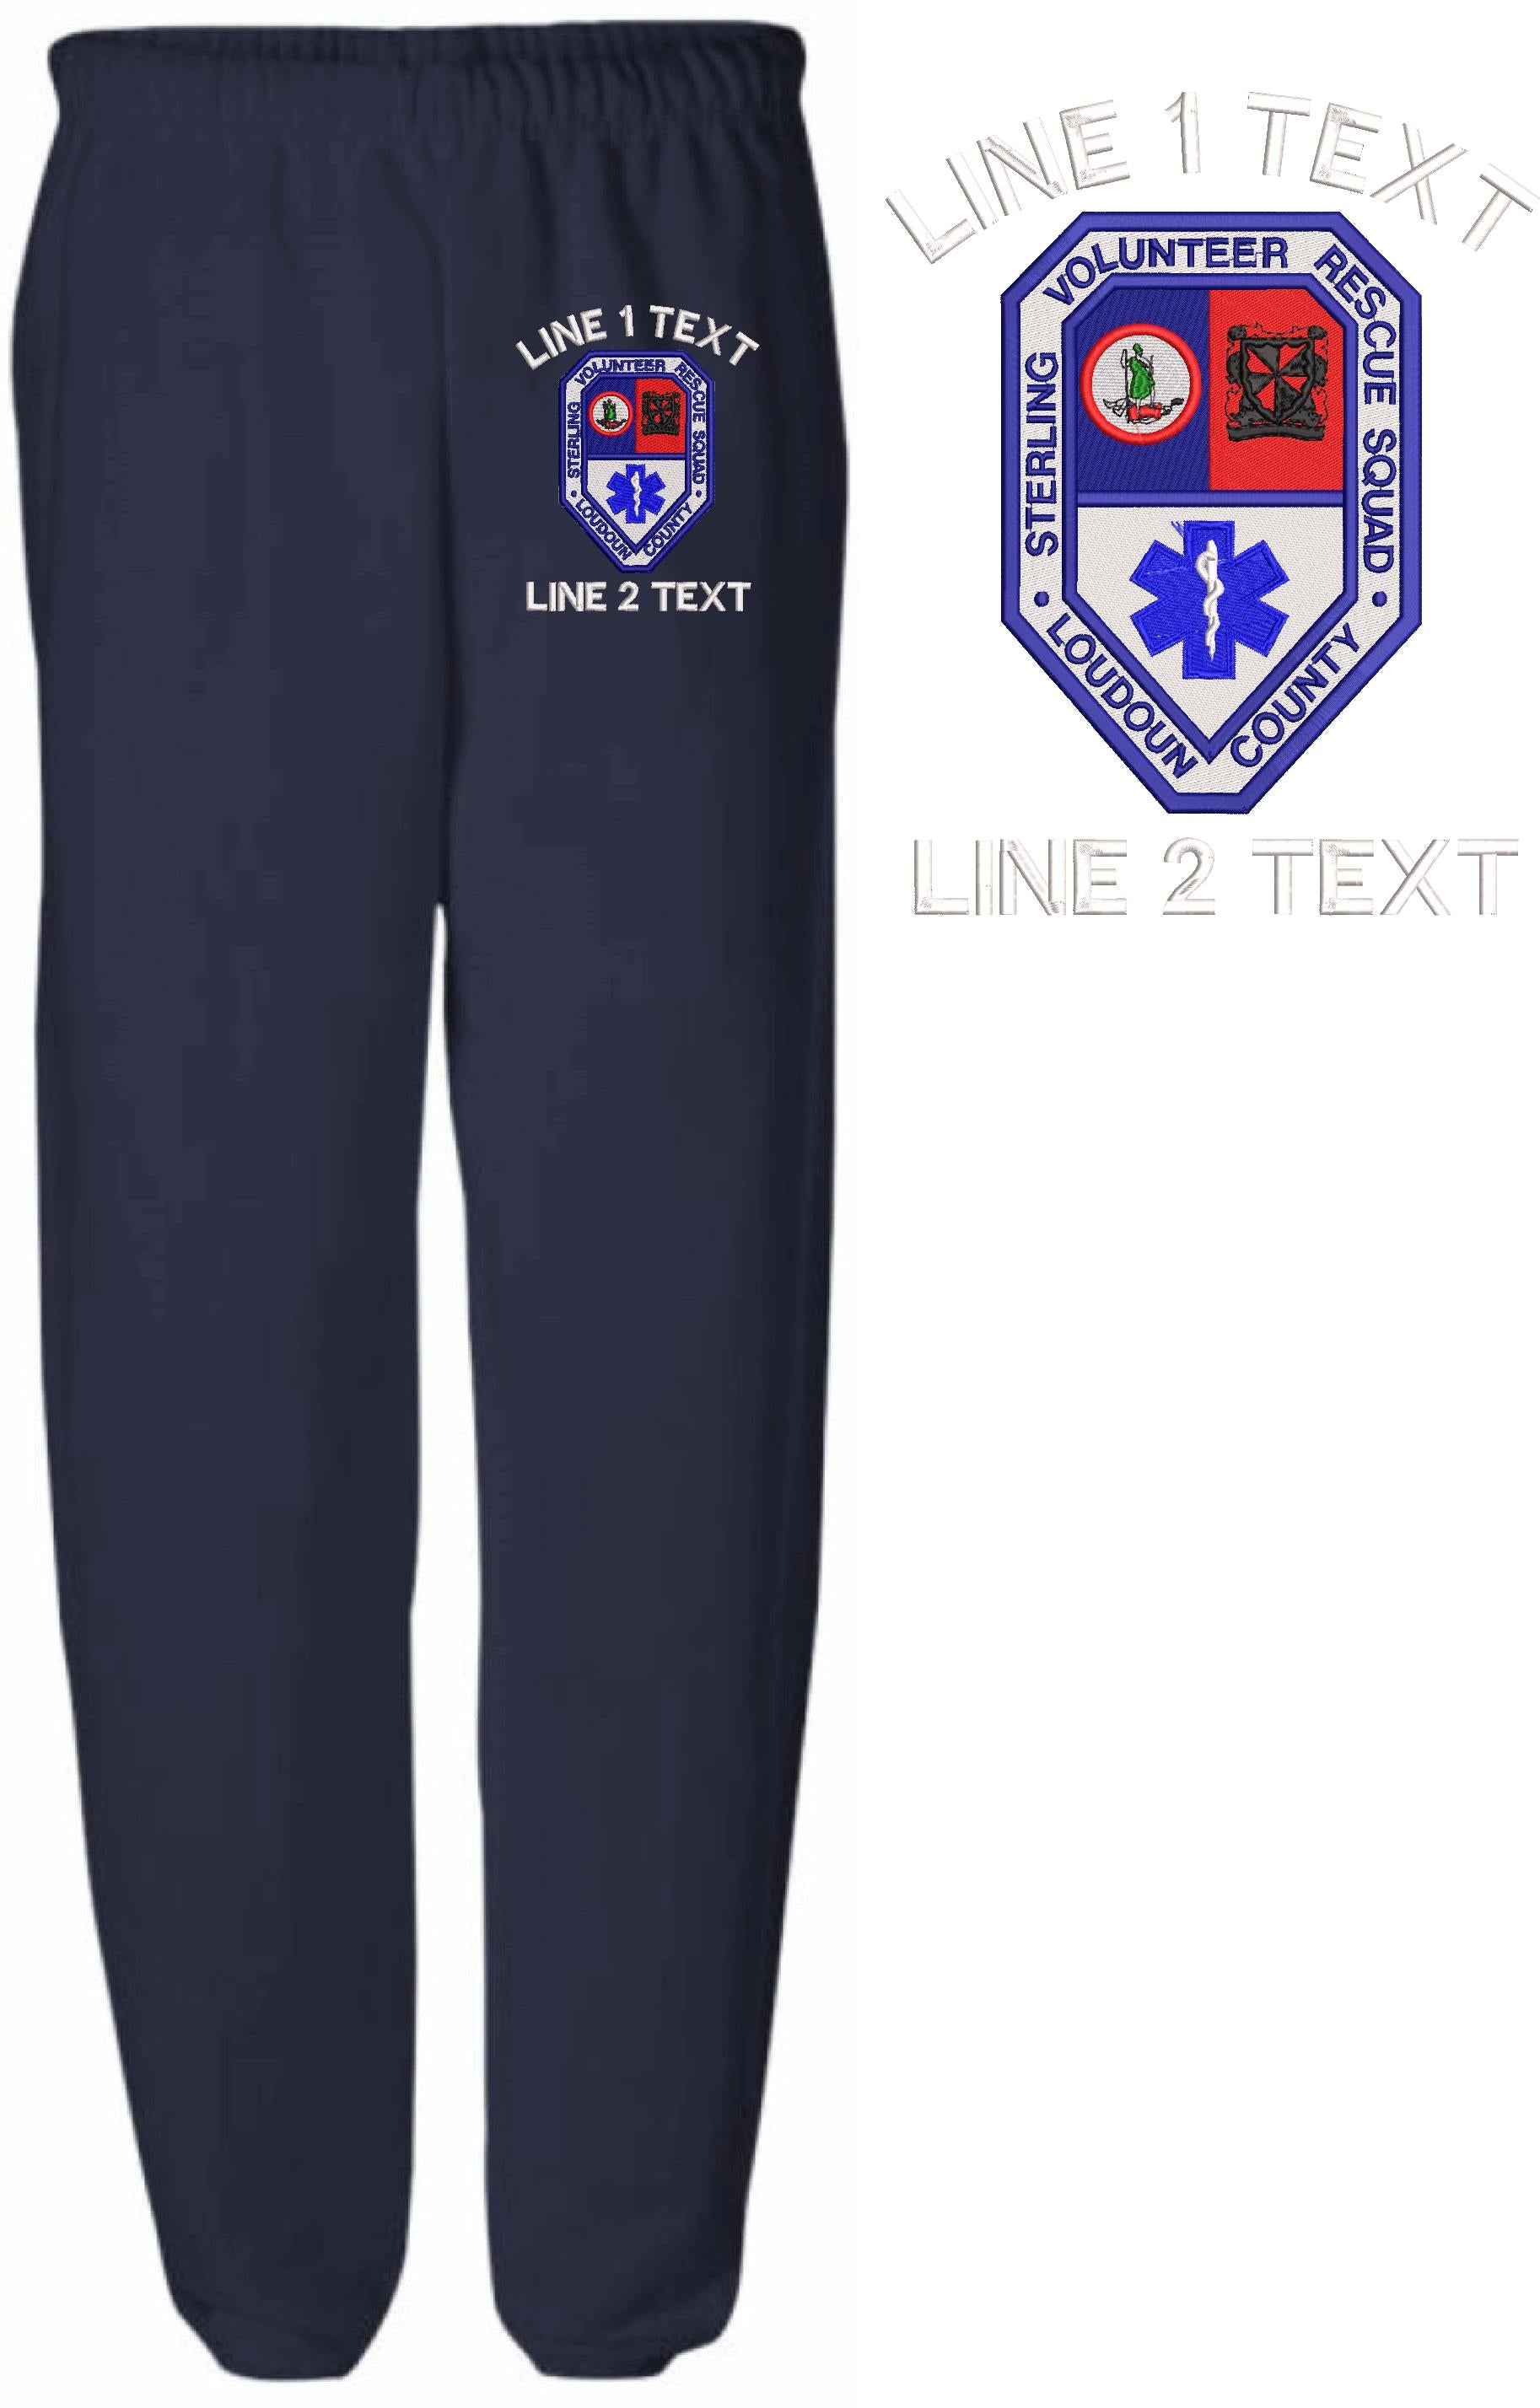 Sterling Volunteer Rescue Embroidered Sweatpants - Powercall Sirens LLC